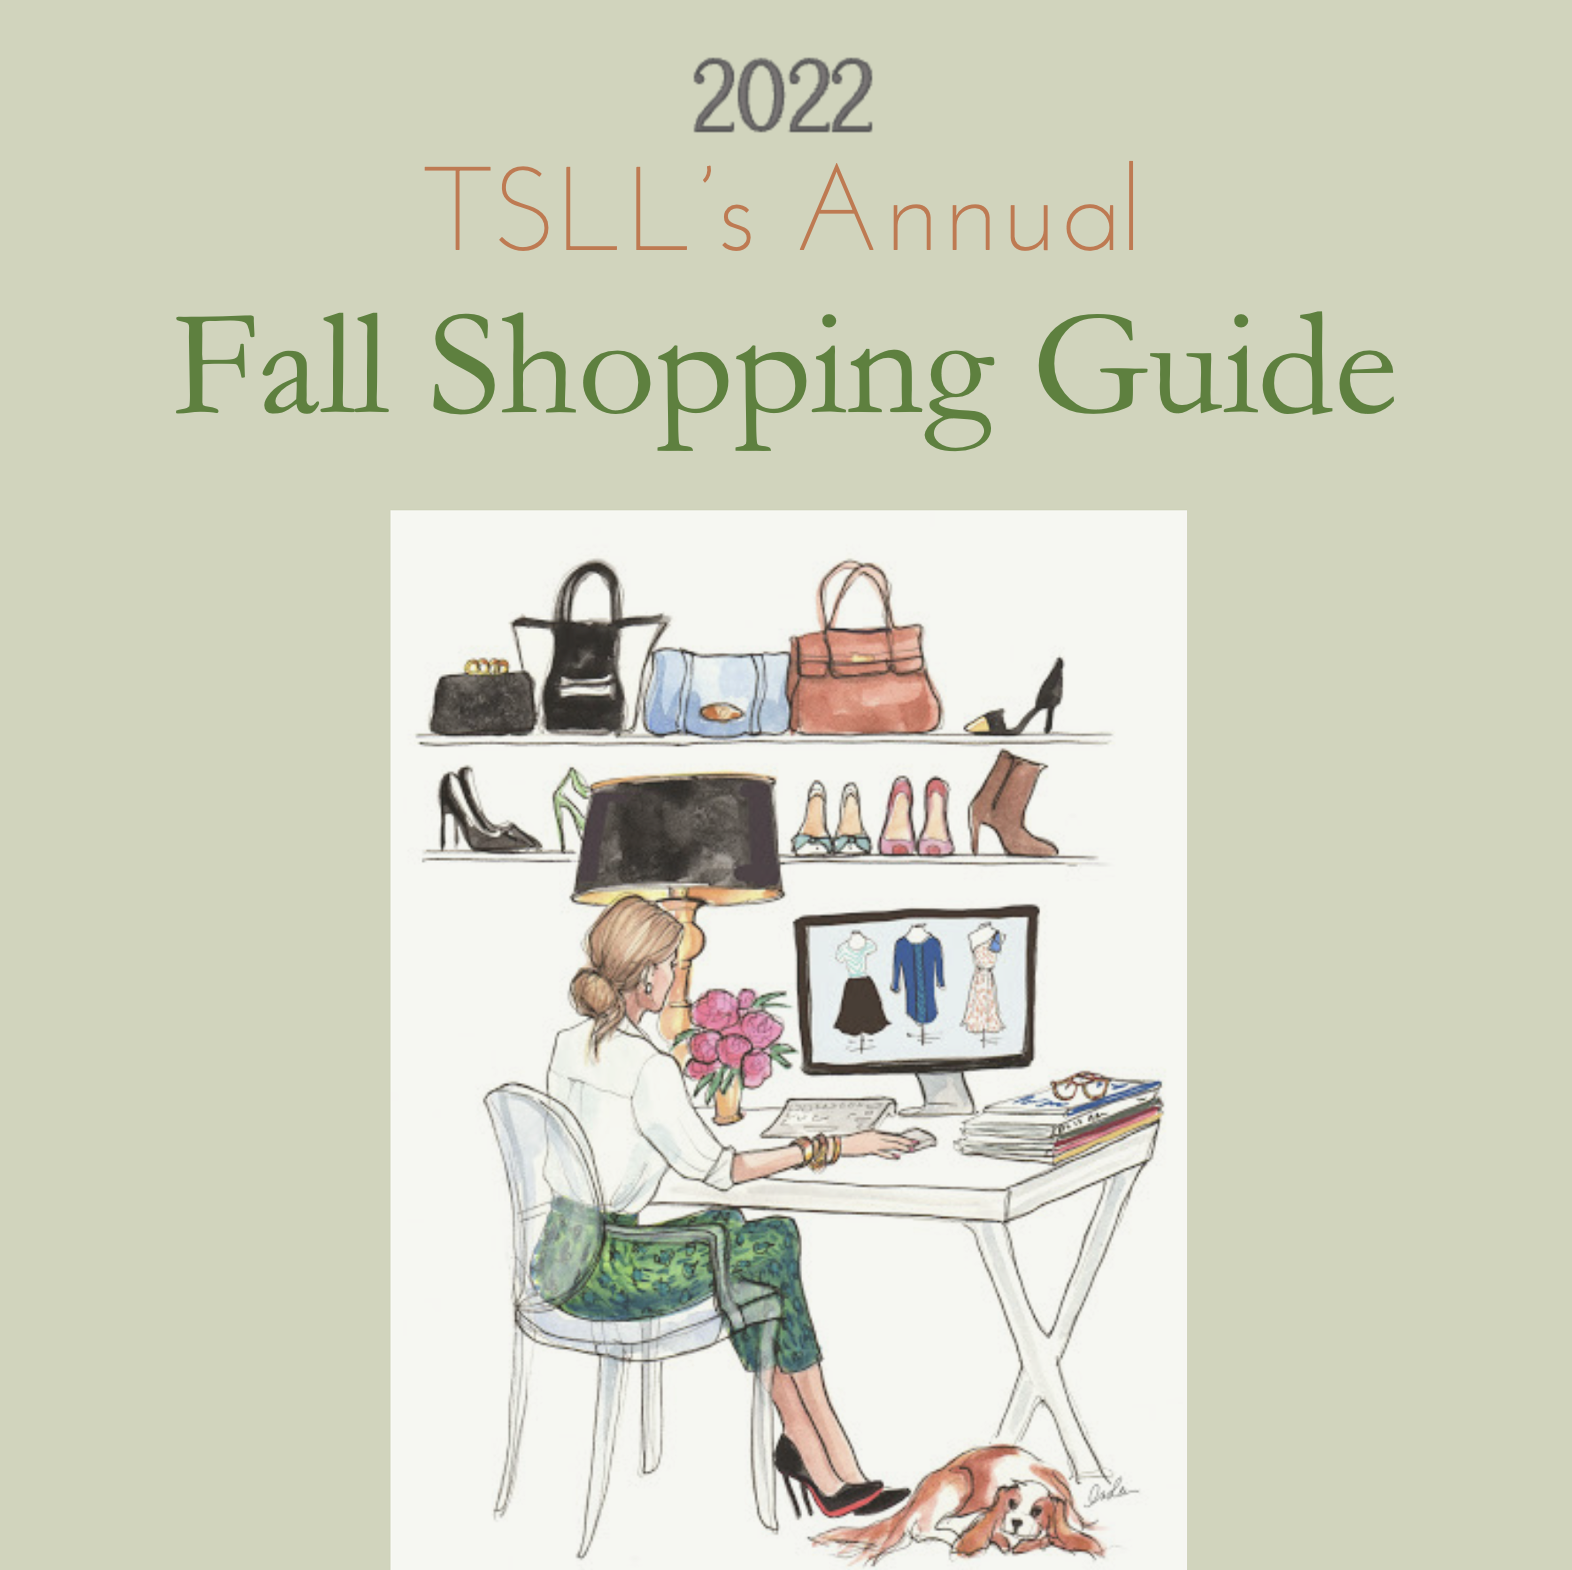 TSLL’s 2022 Annual Fall Shopping Guide, 100+ Capsule Wardrobe Finds